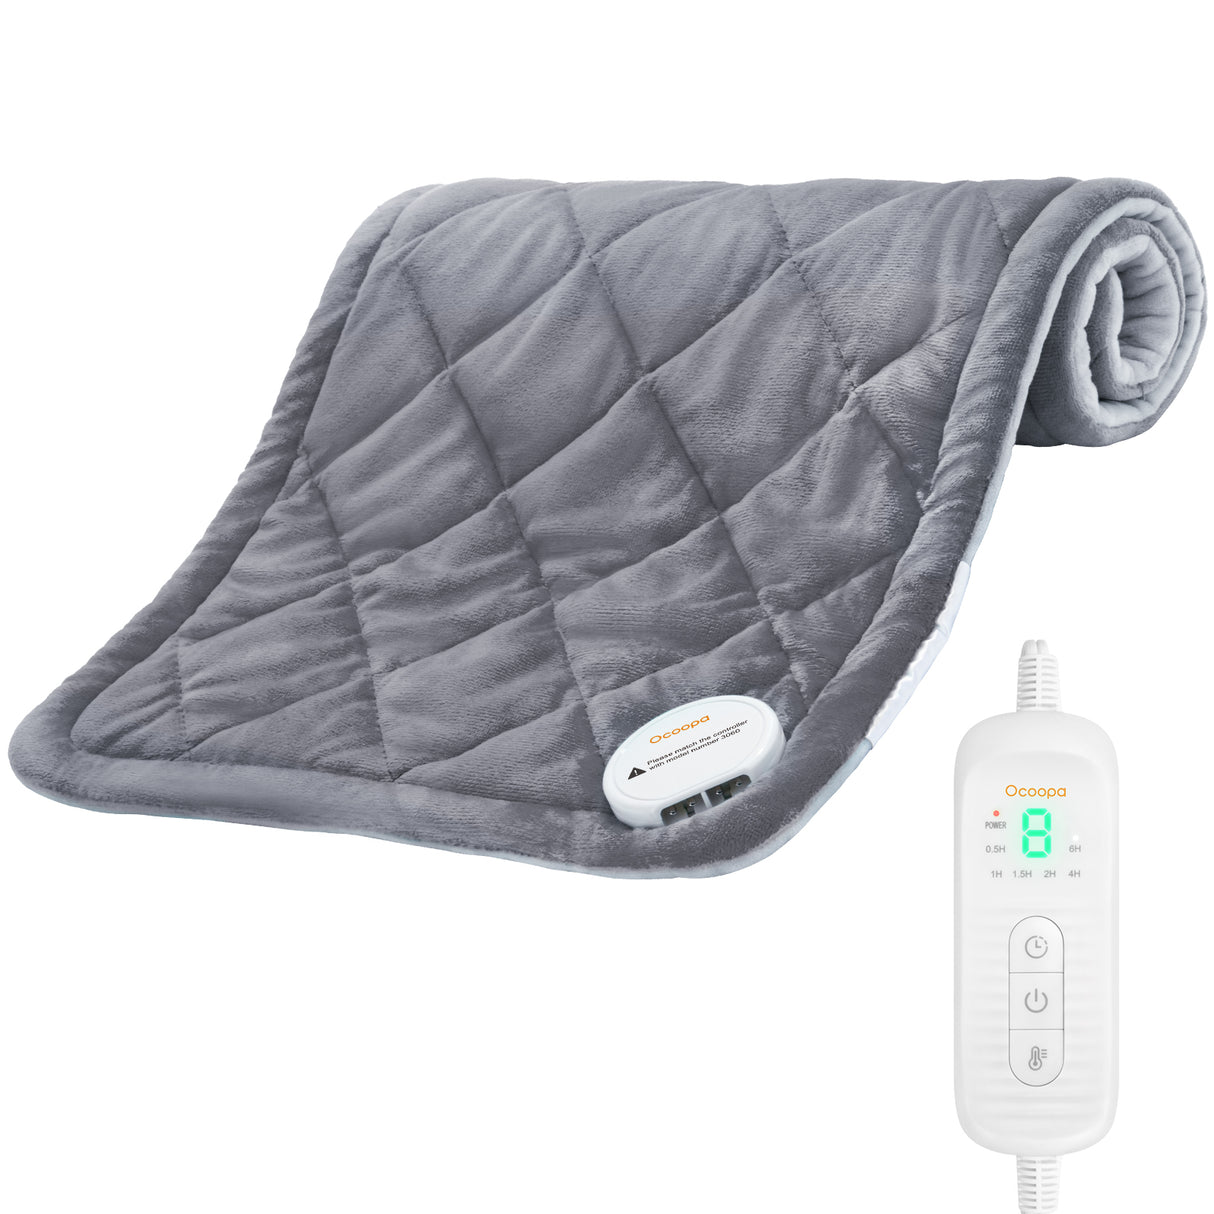 SINGLE-USE HEATING AND COOLING PADS - TECHNOPATH